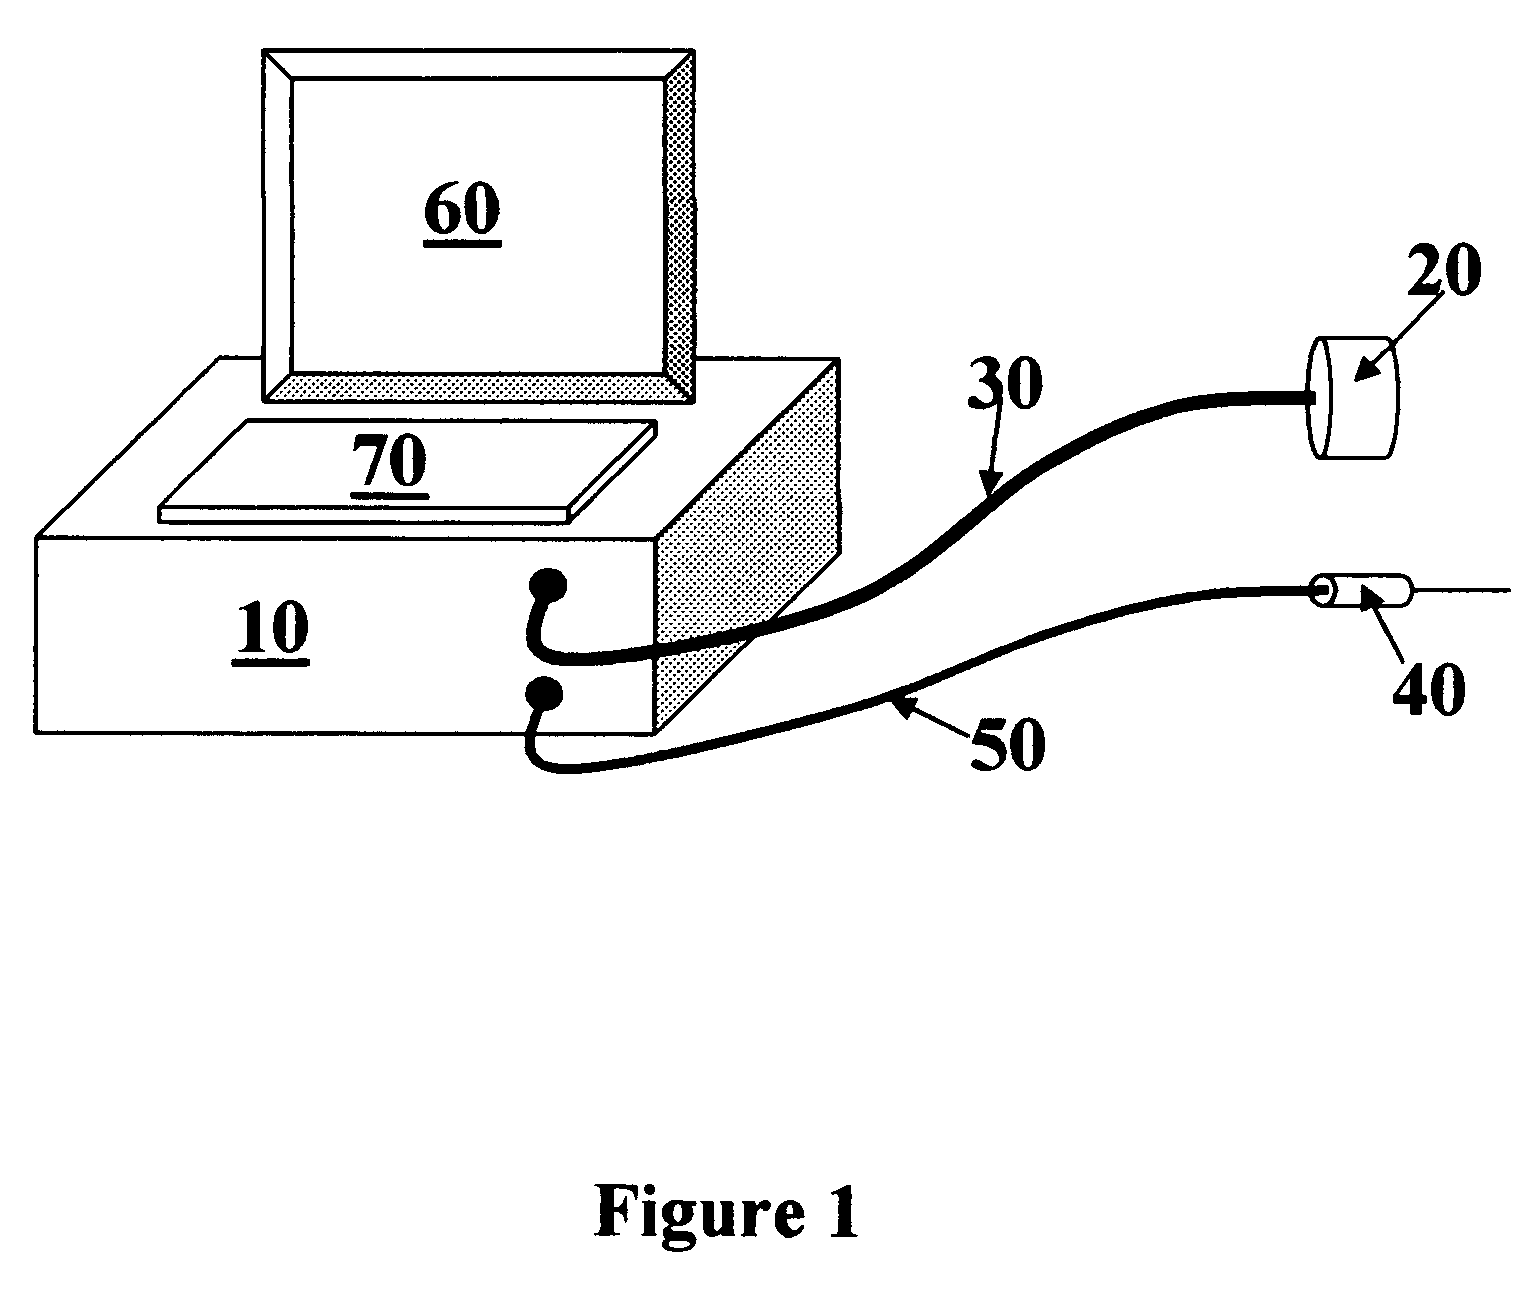 Ultrasound guided tissue measurement system